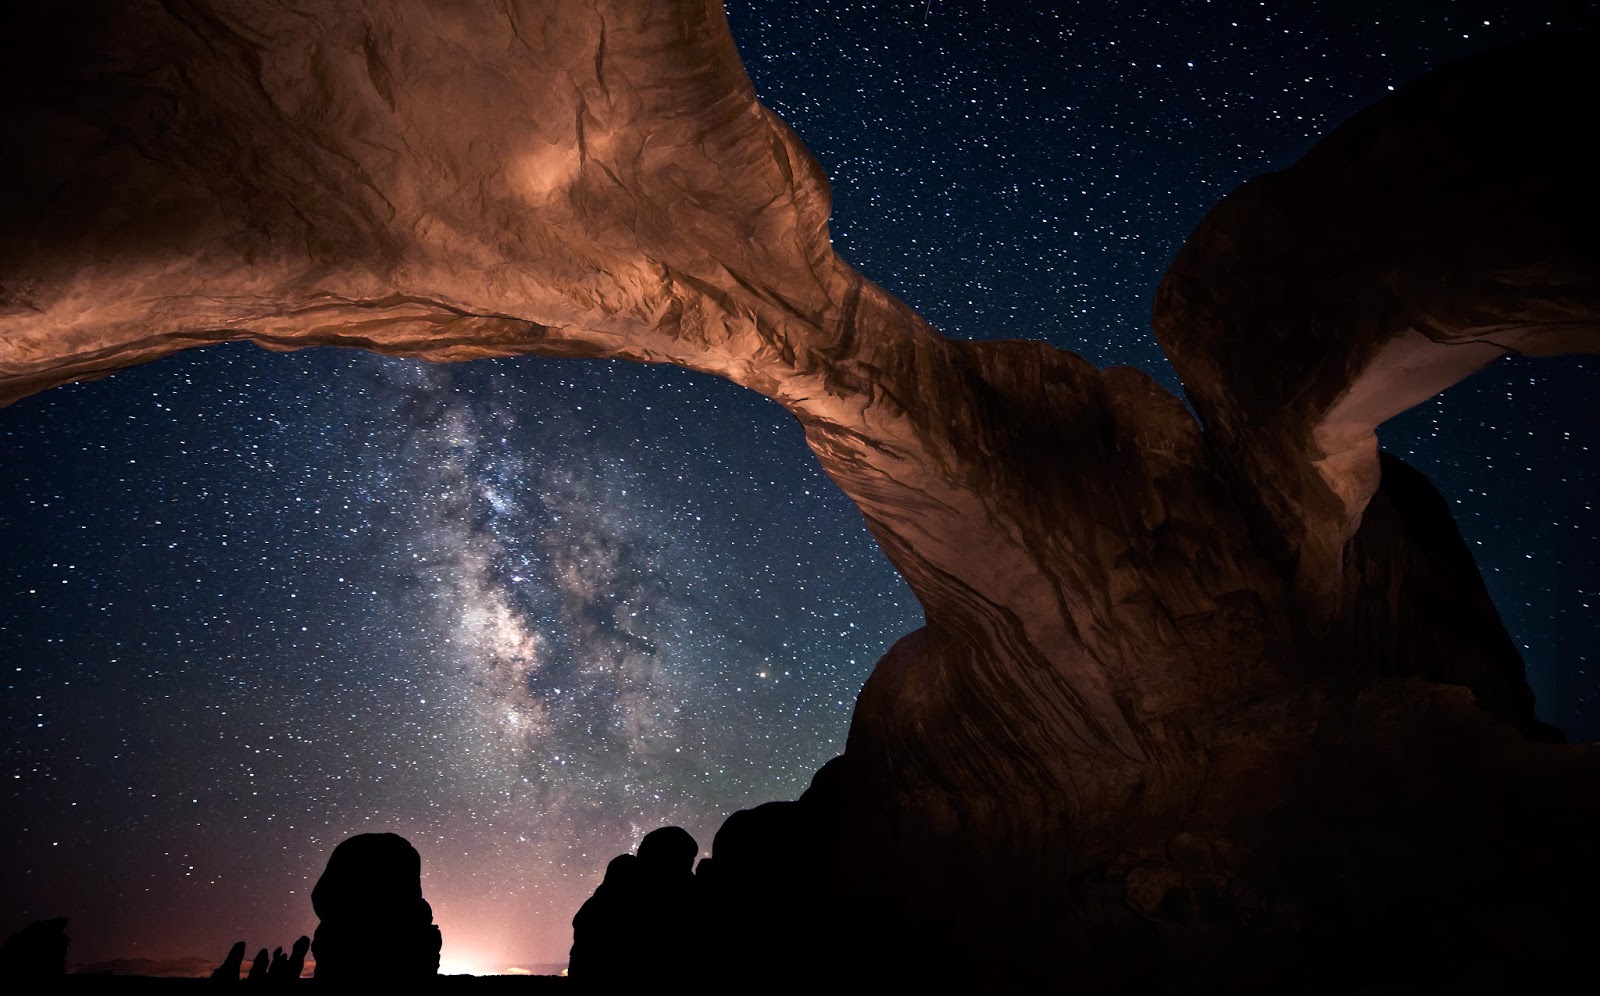 Milky Way Galaxy - Arches National Park